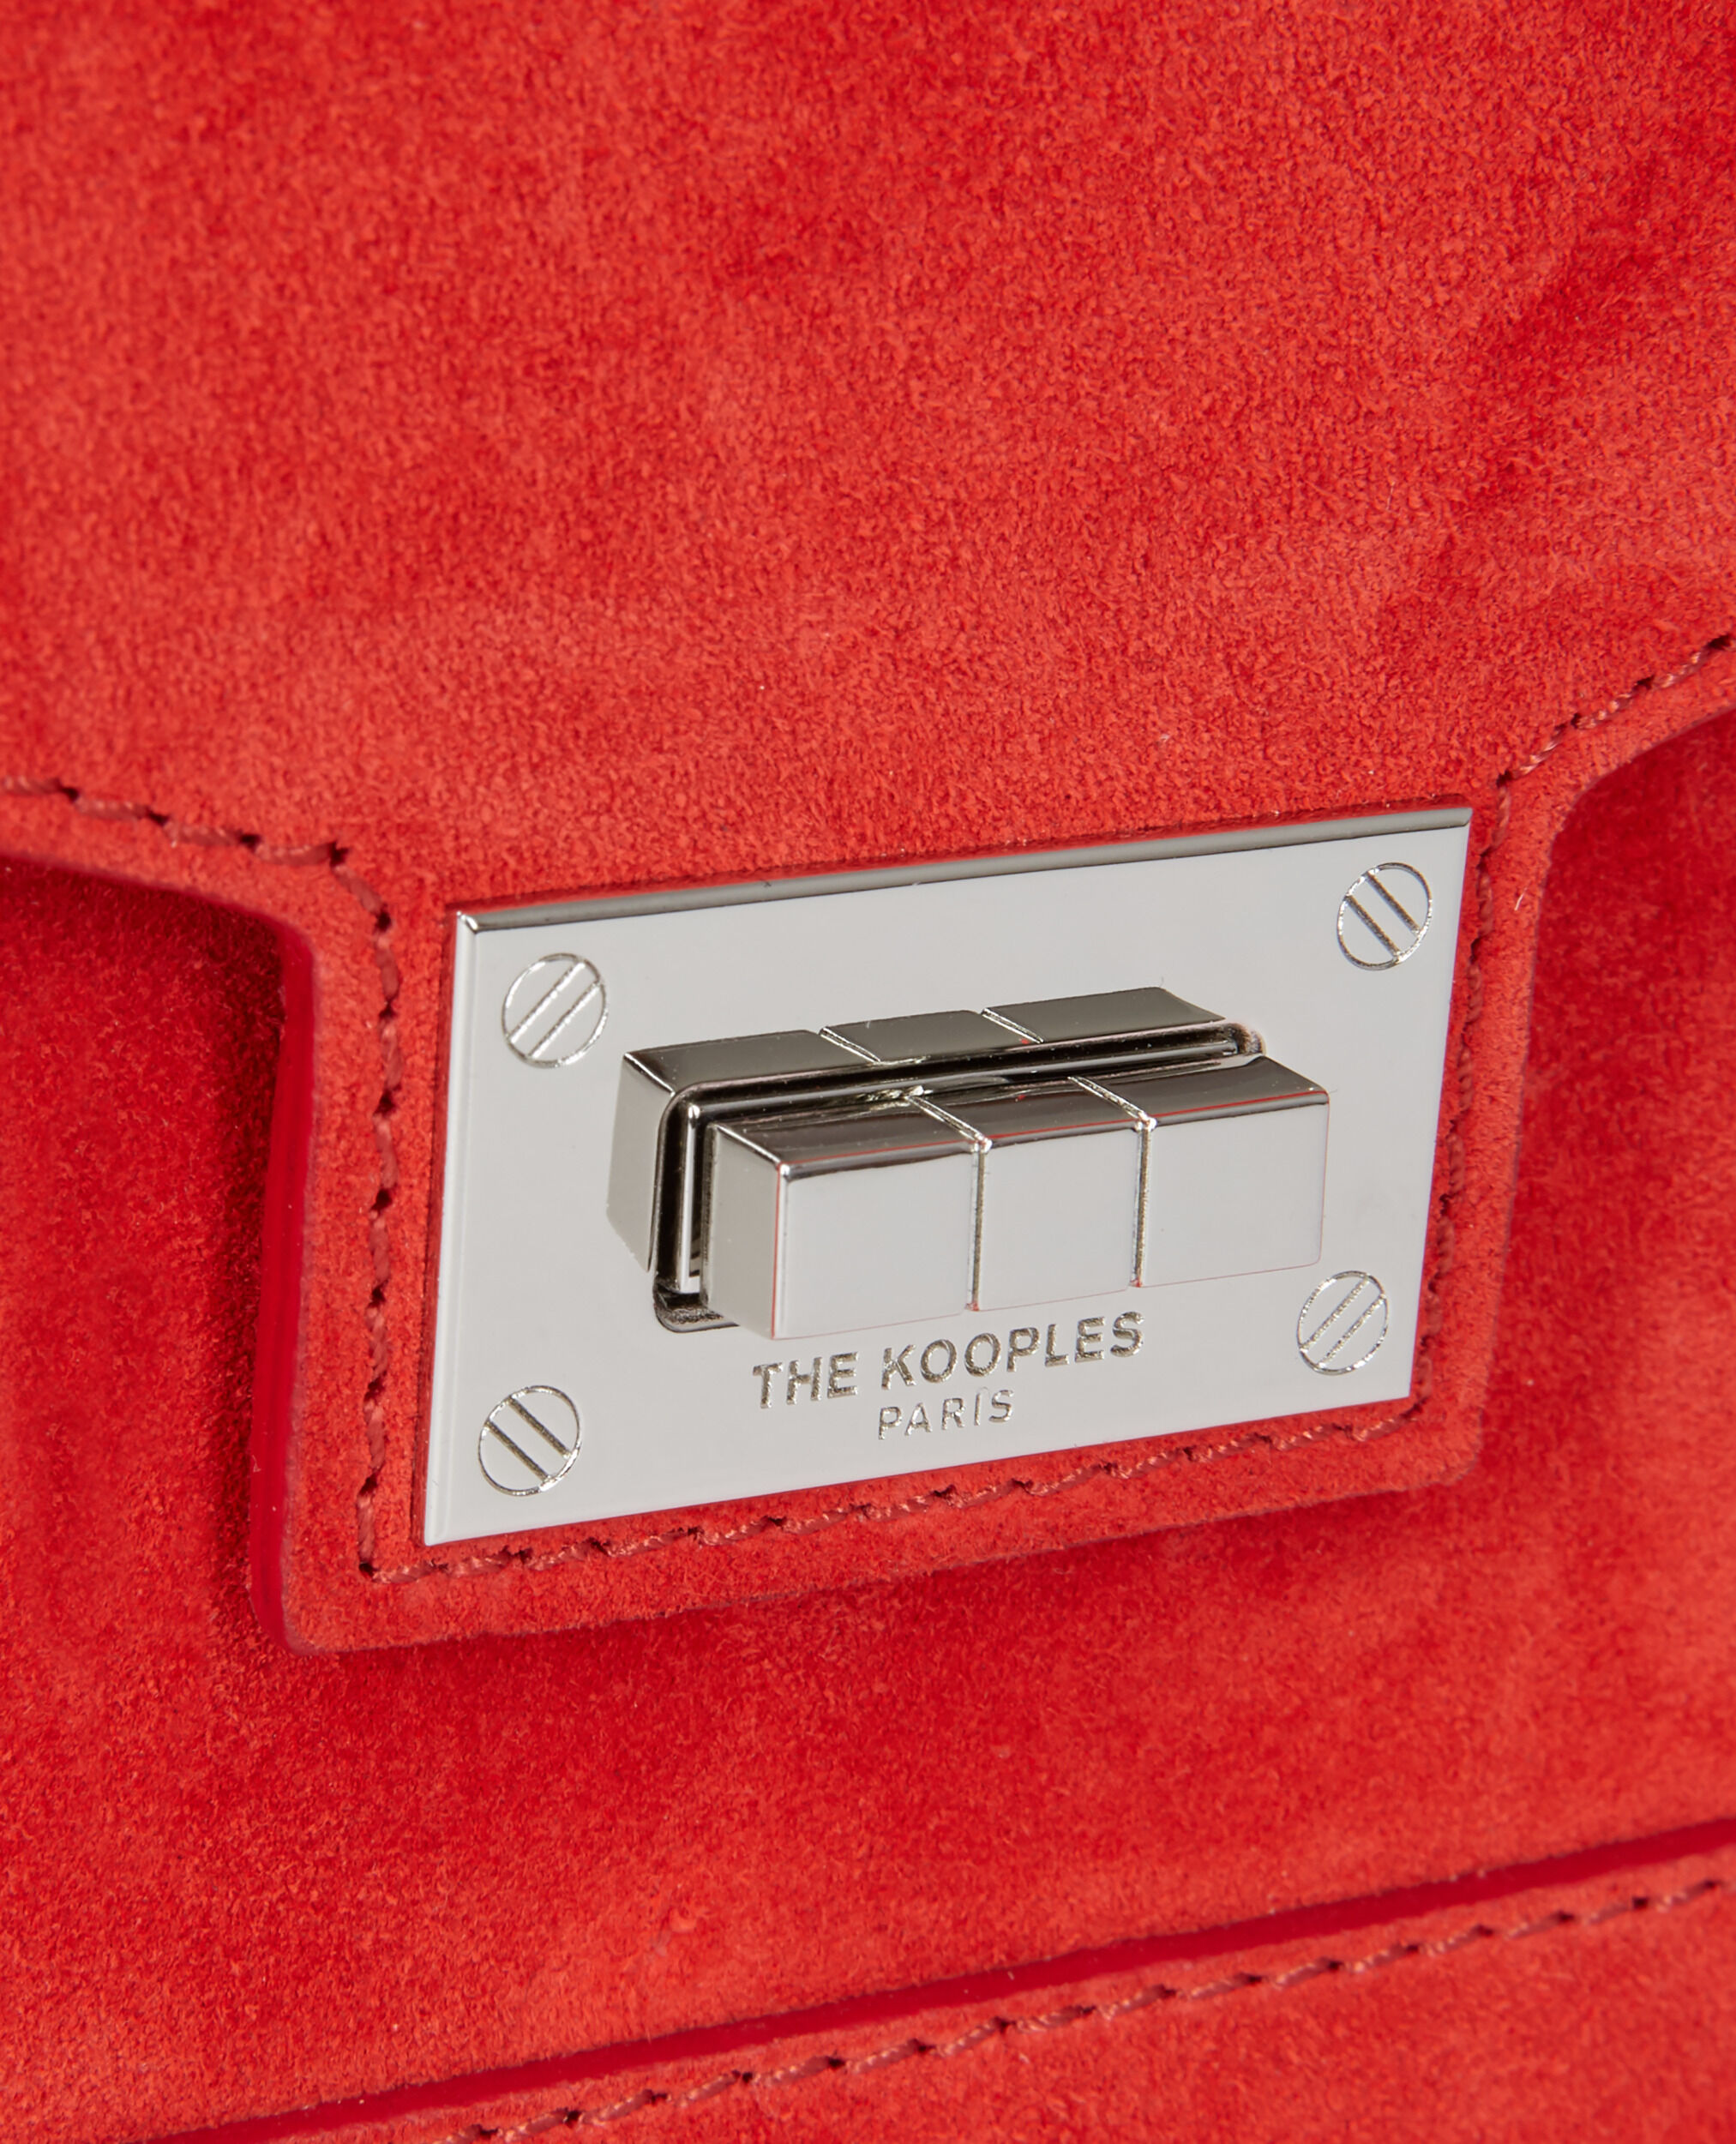 Small Emily bag in red suede leather, RED, hi-res image number null